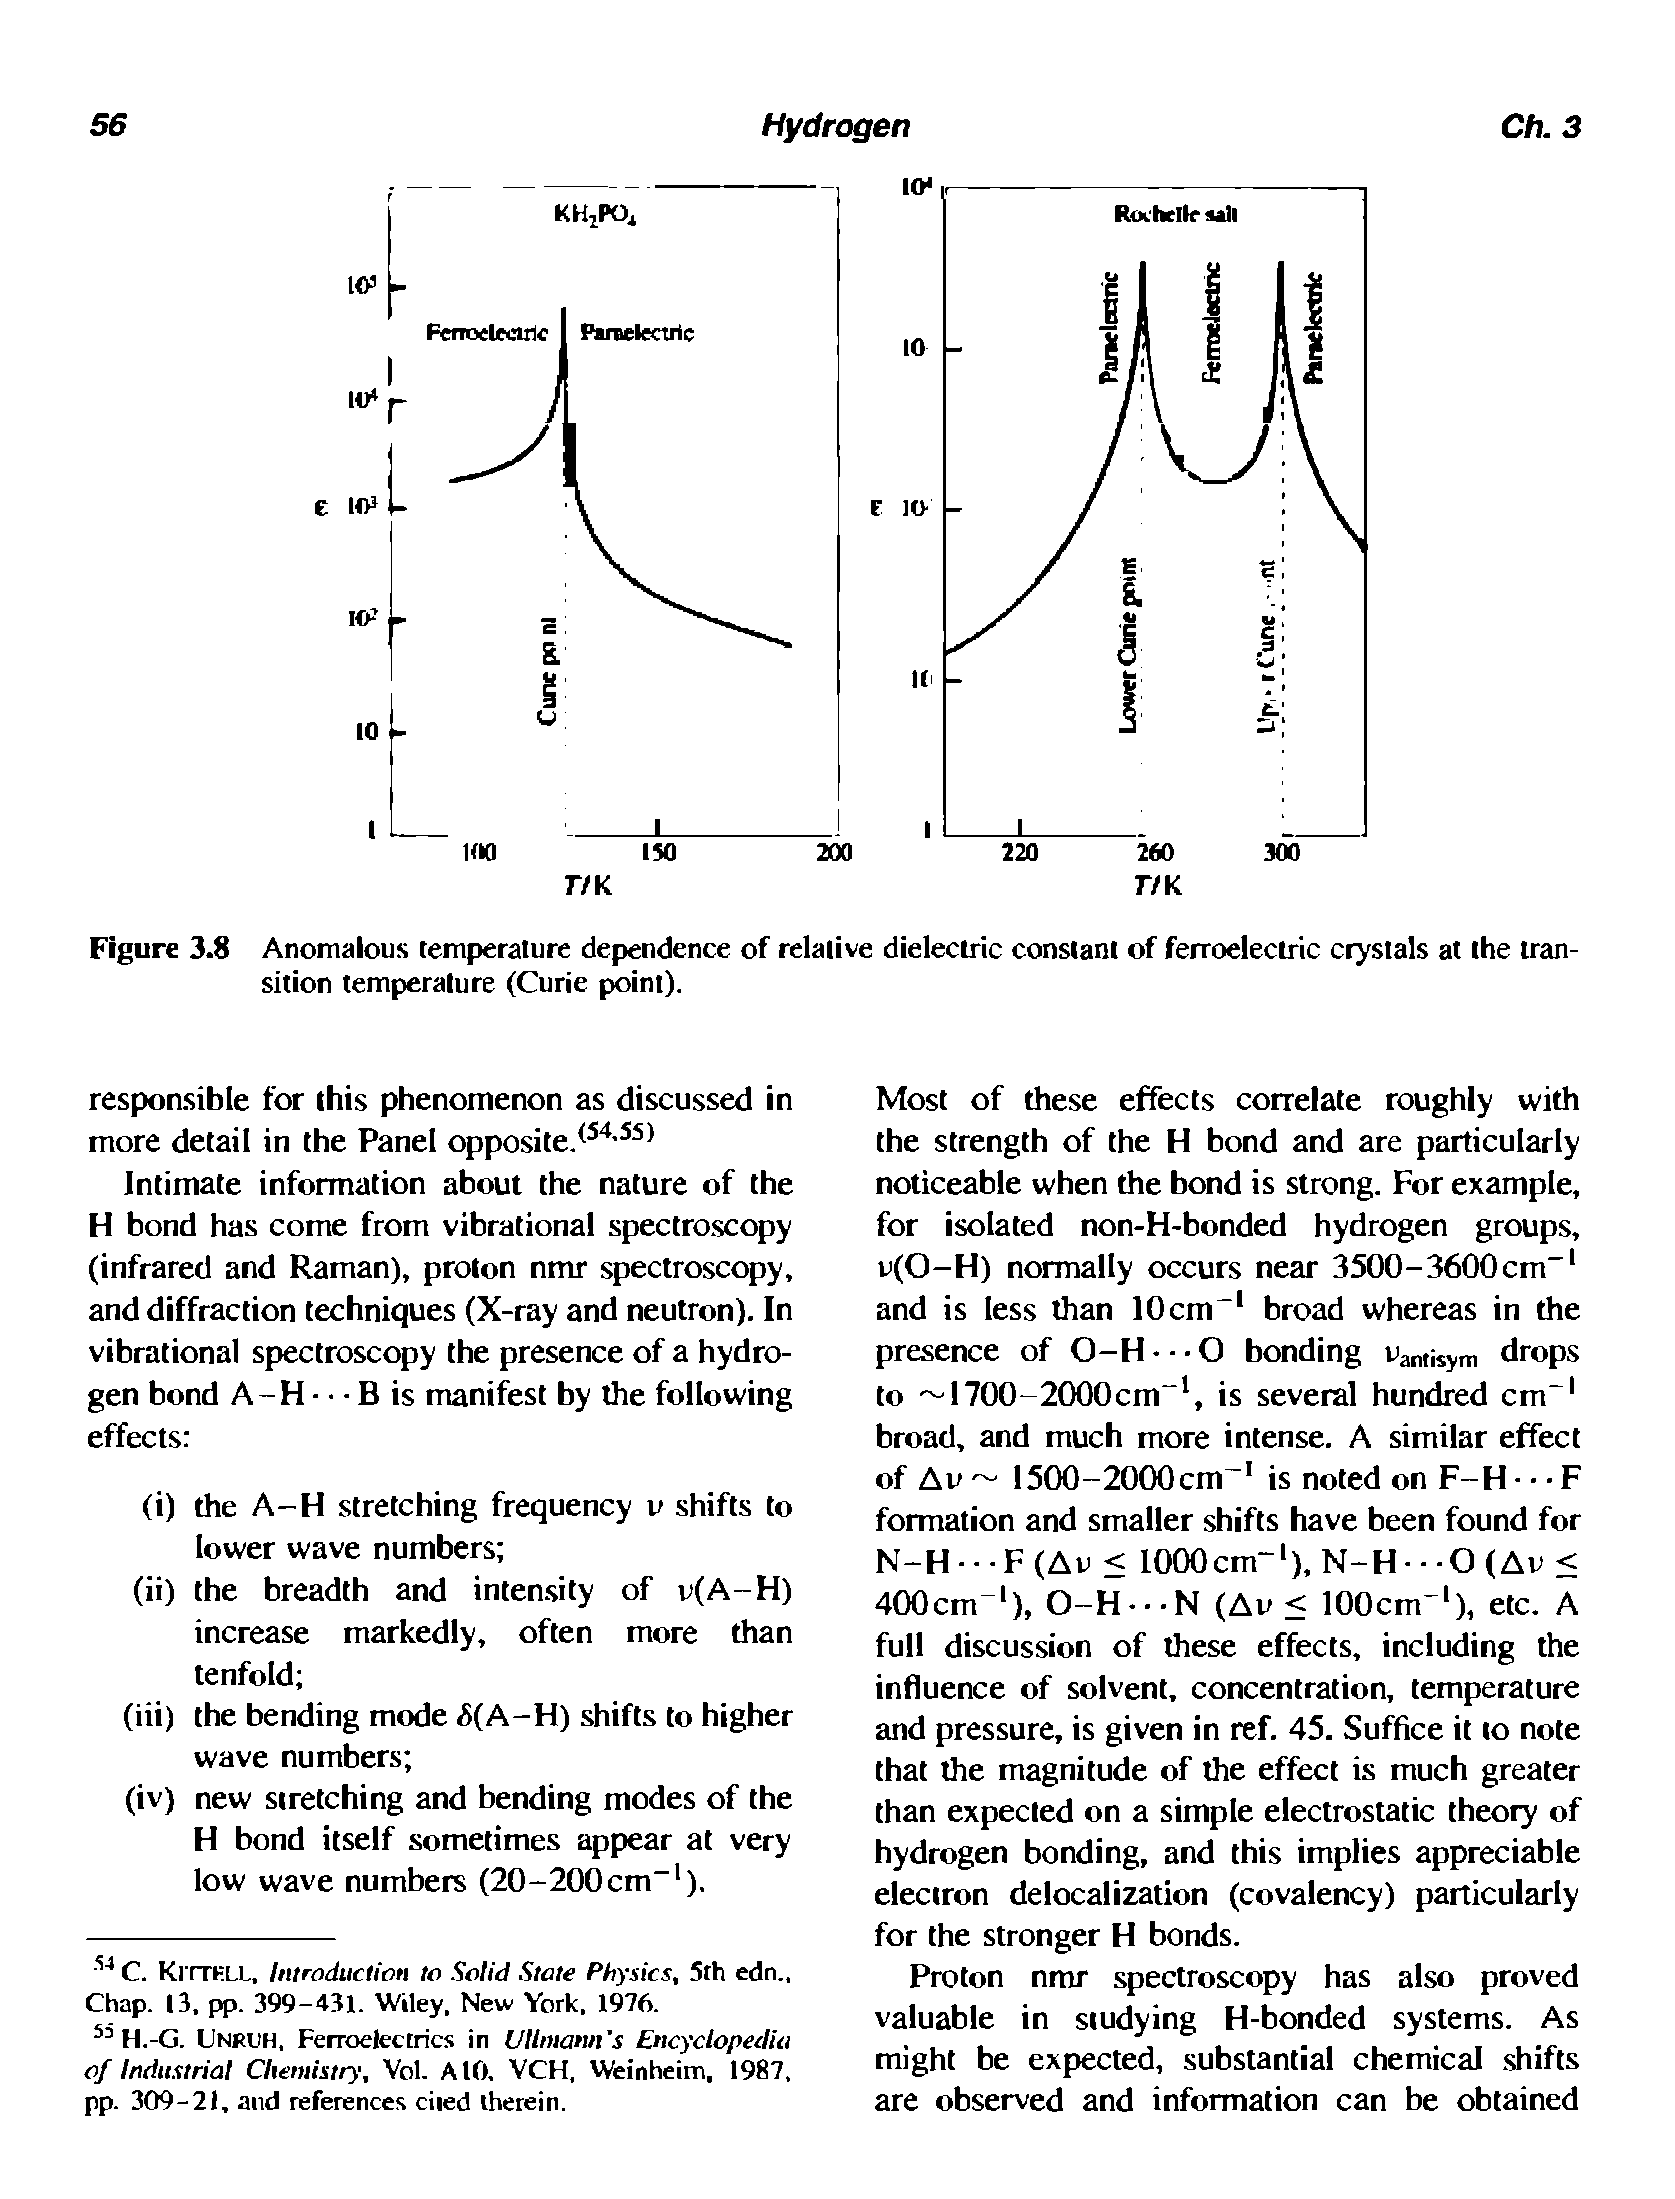 Figure 3.8 Anomalous temperature dependence of relative dielectric constant of ferroelectric crystals at the transition temperature (Curie point).